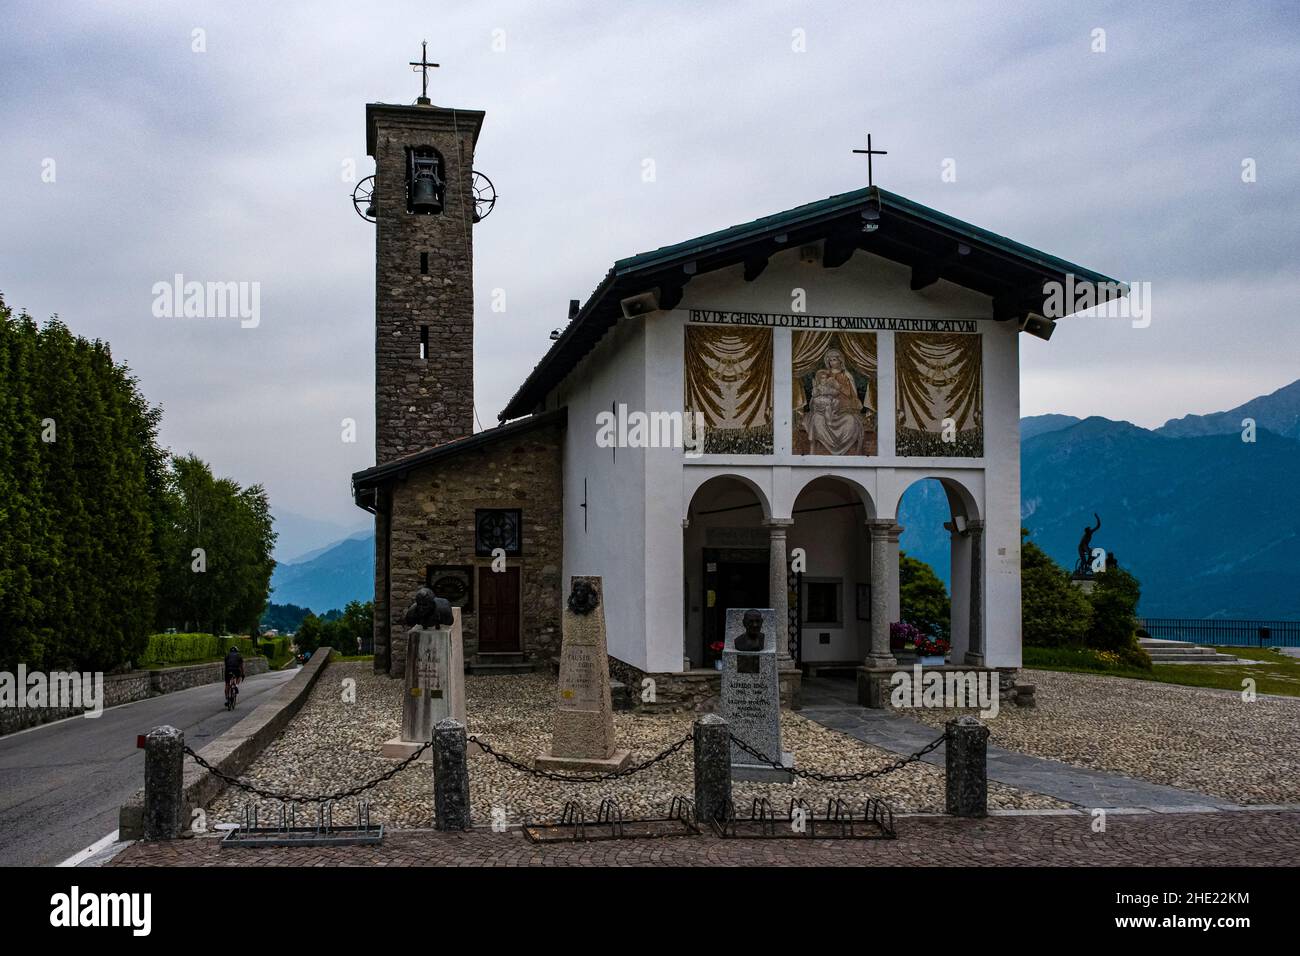 The little church on the hill Madonna del Ghisallo is dedicated to cyclists. Stock Photo